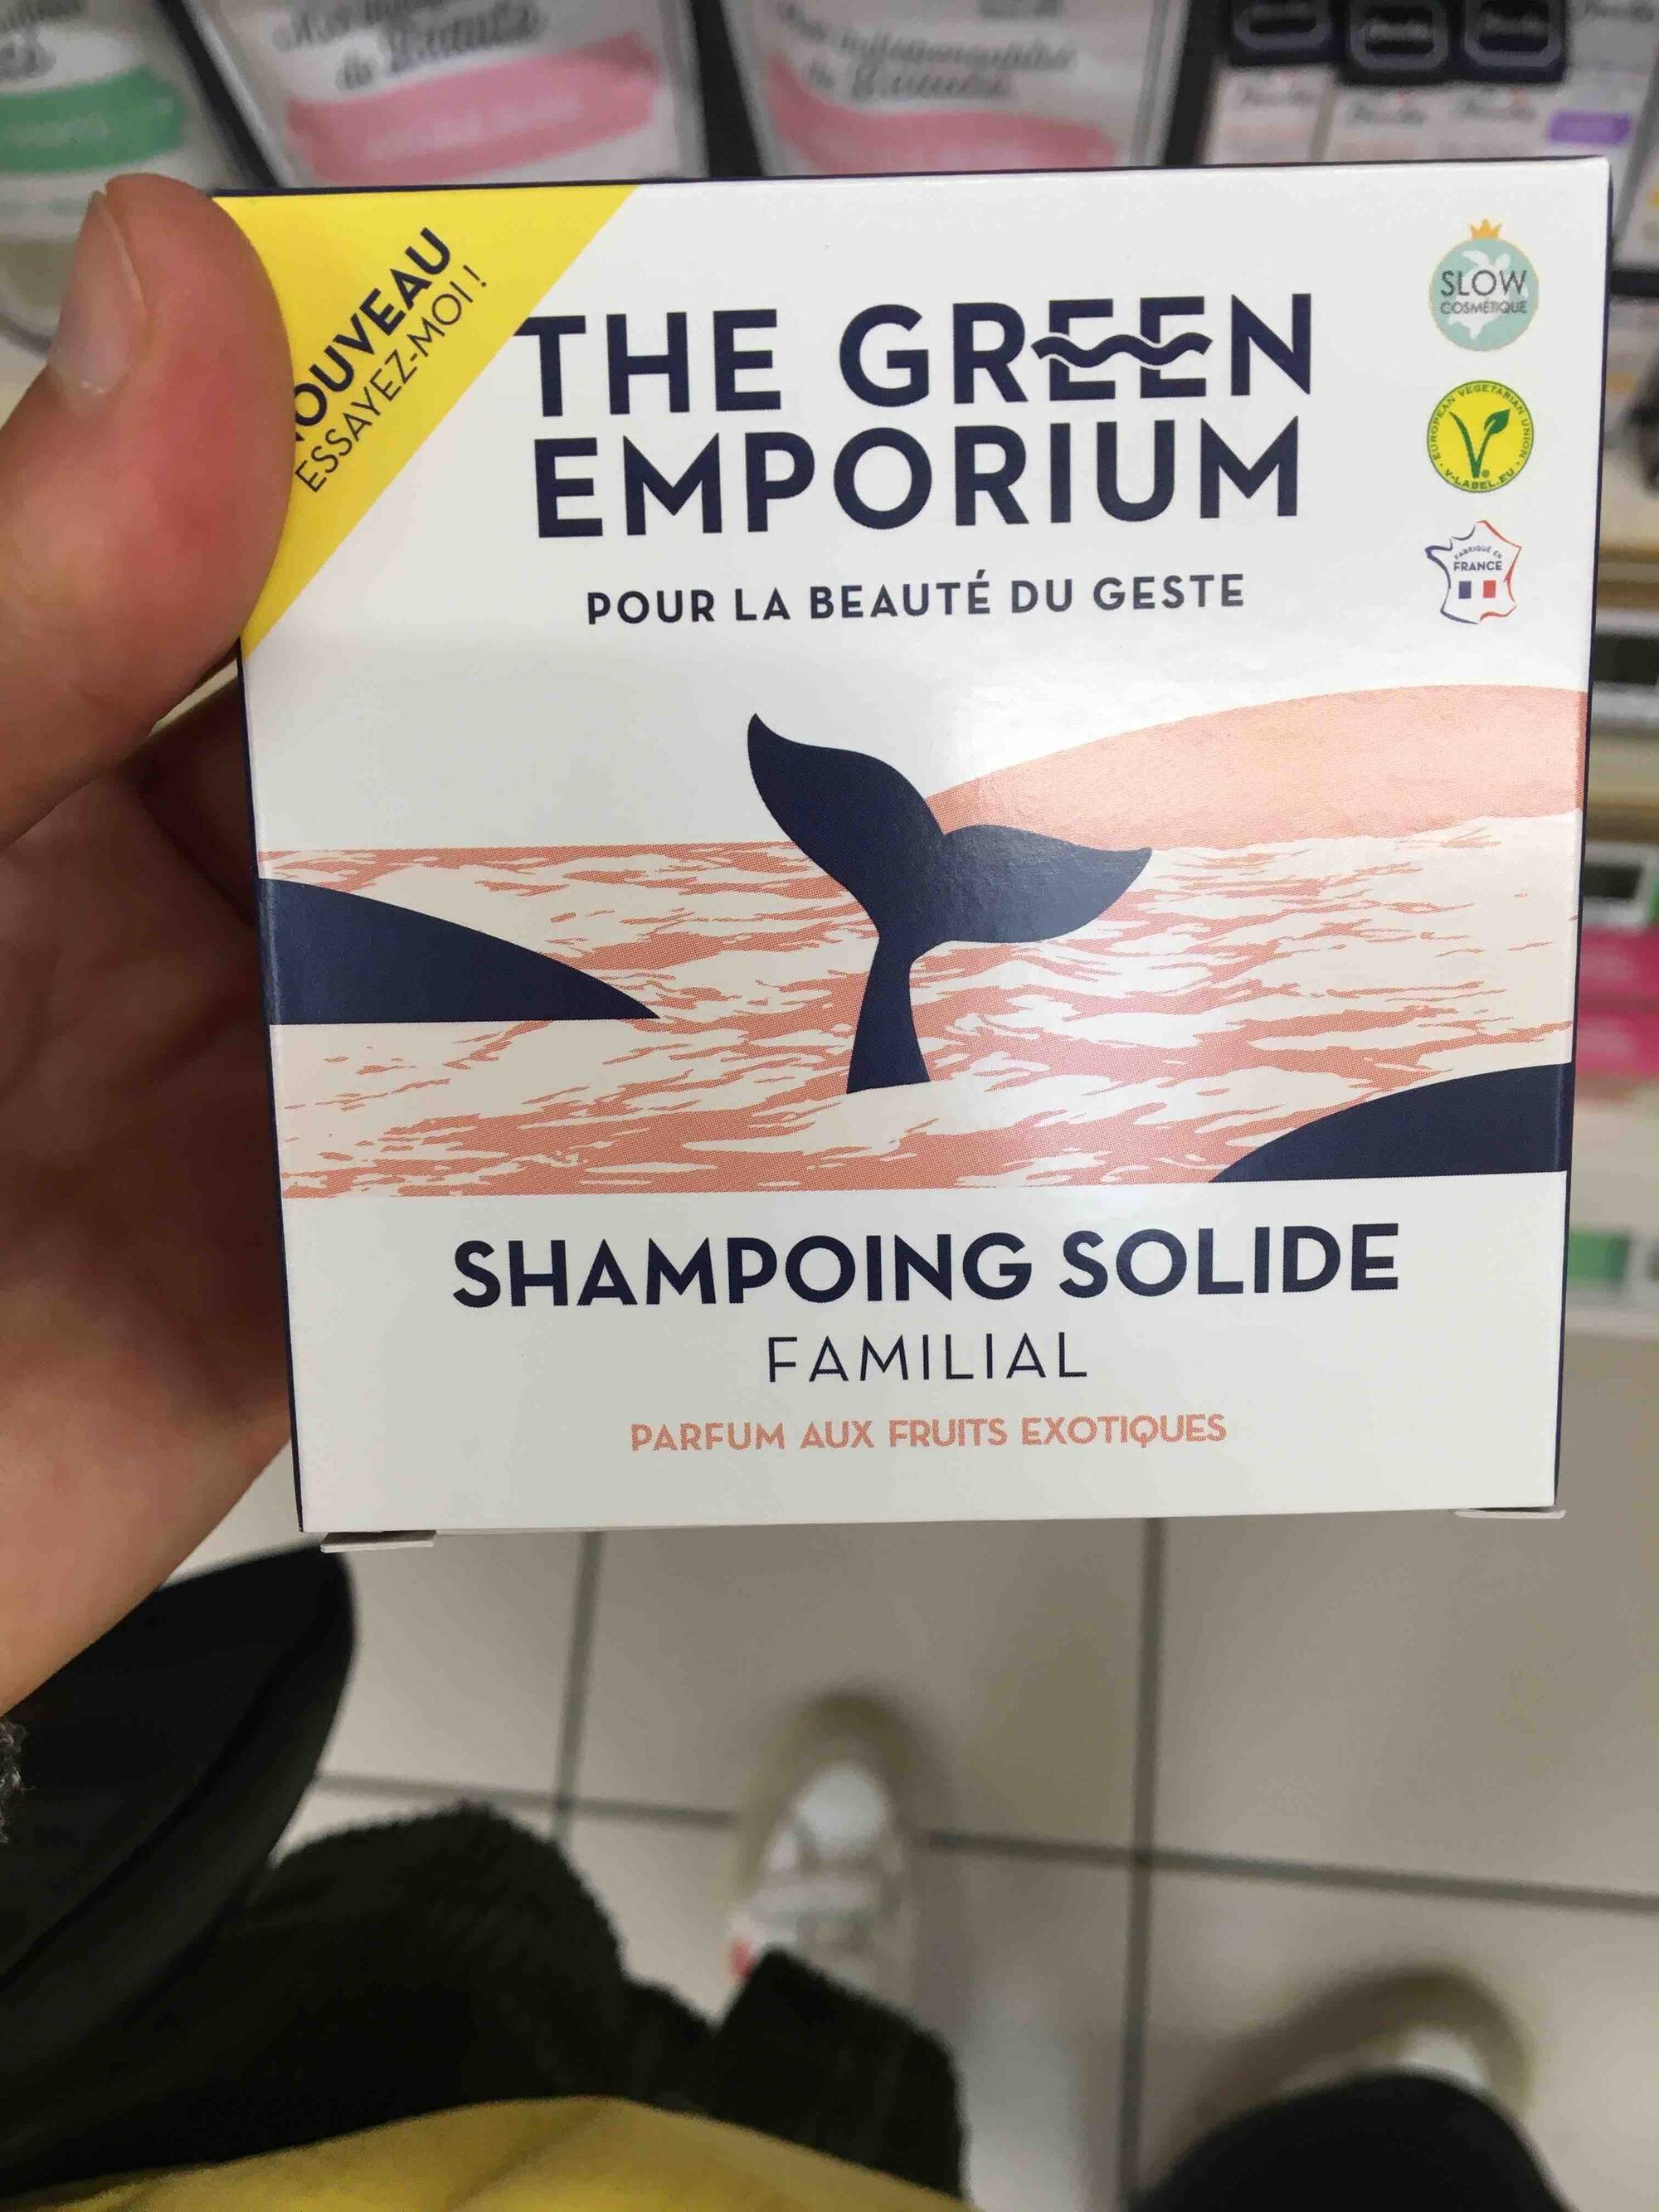 THE GREEN EMPORIUM - Shampooing solide familial